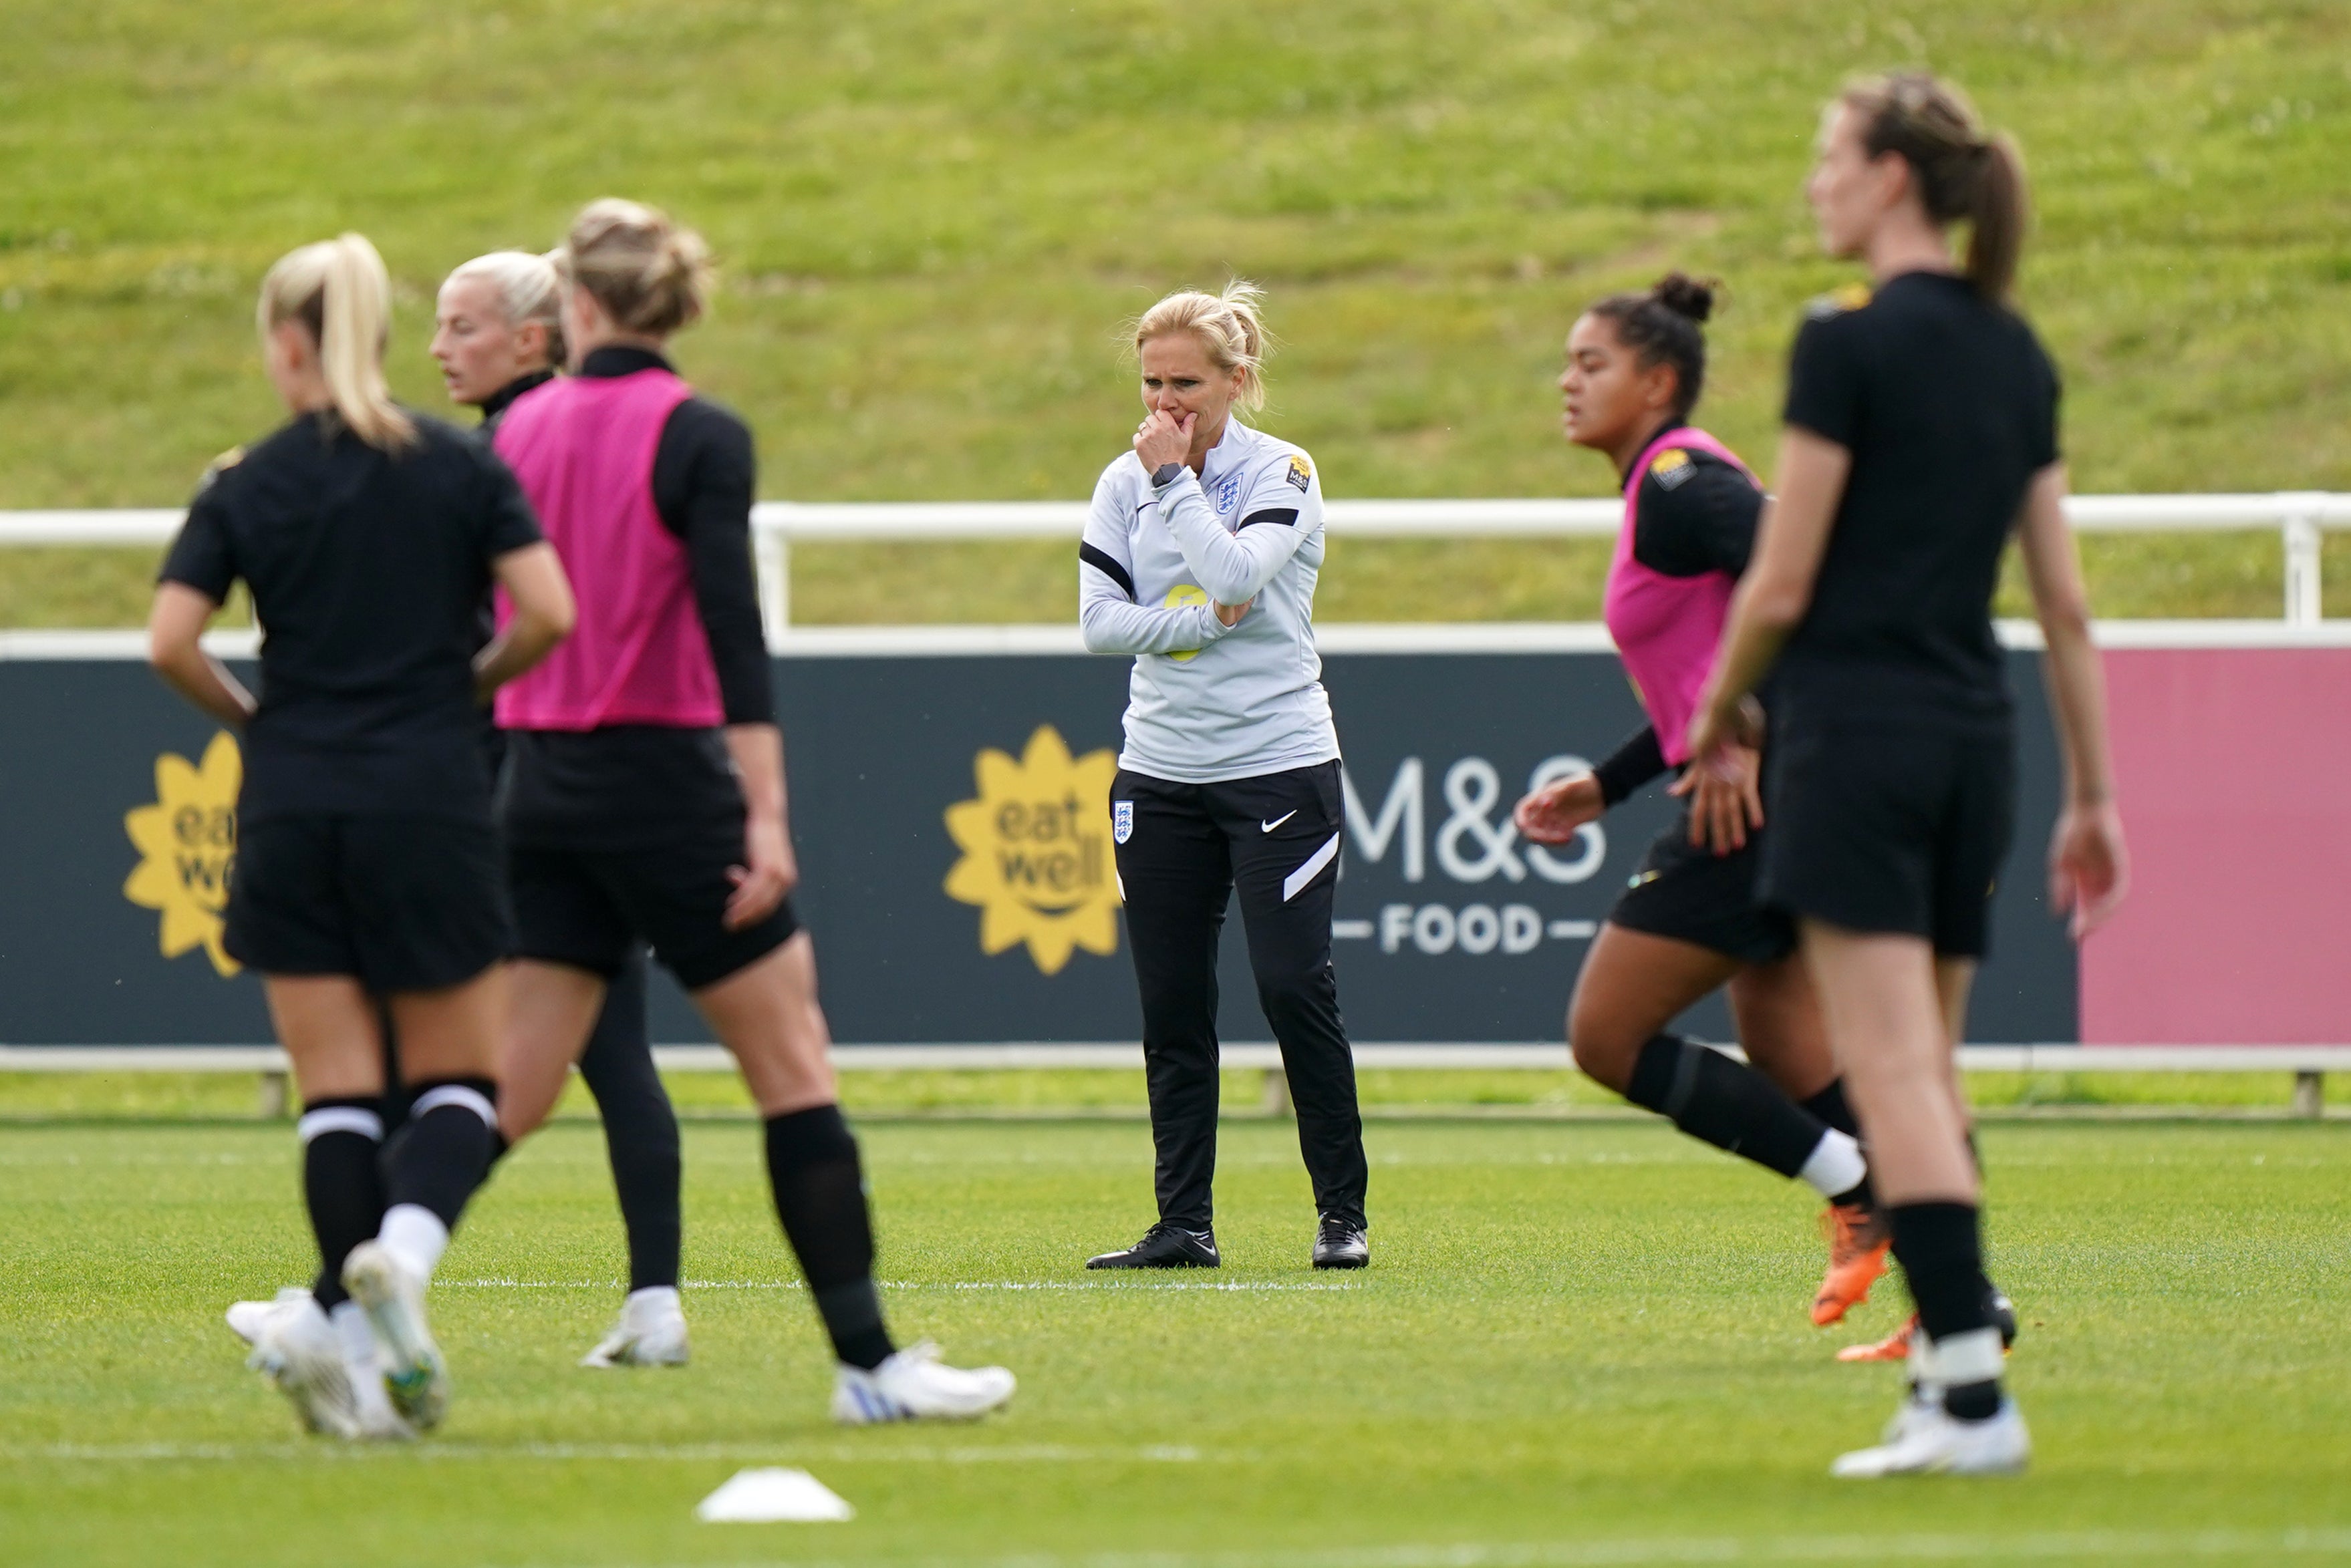 Sarina Wiegman’s final 23-player squad for Euro 2022 will be announced on Wednesday (Tim Goode/PA)